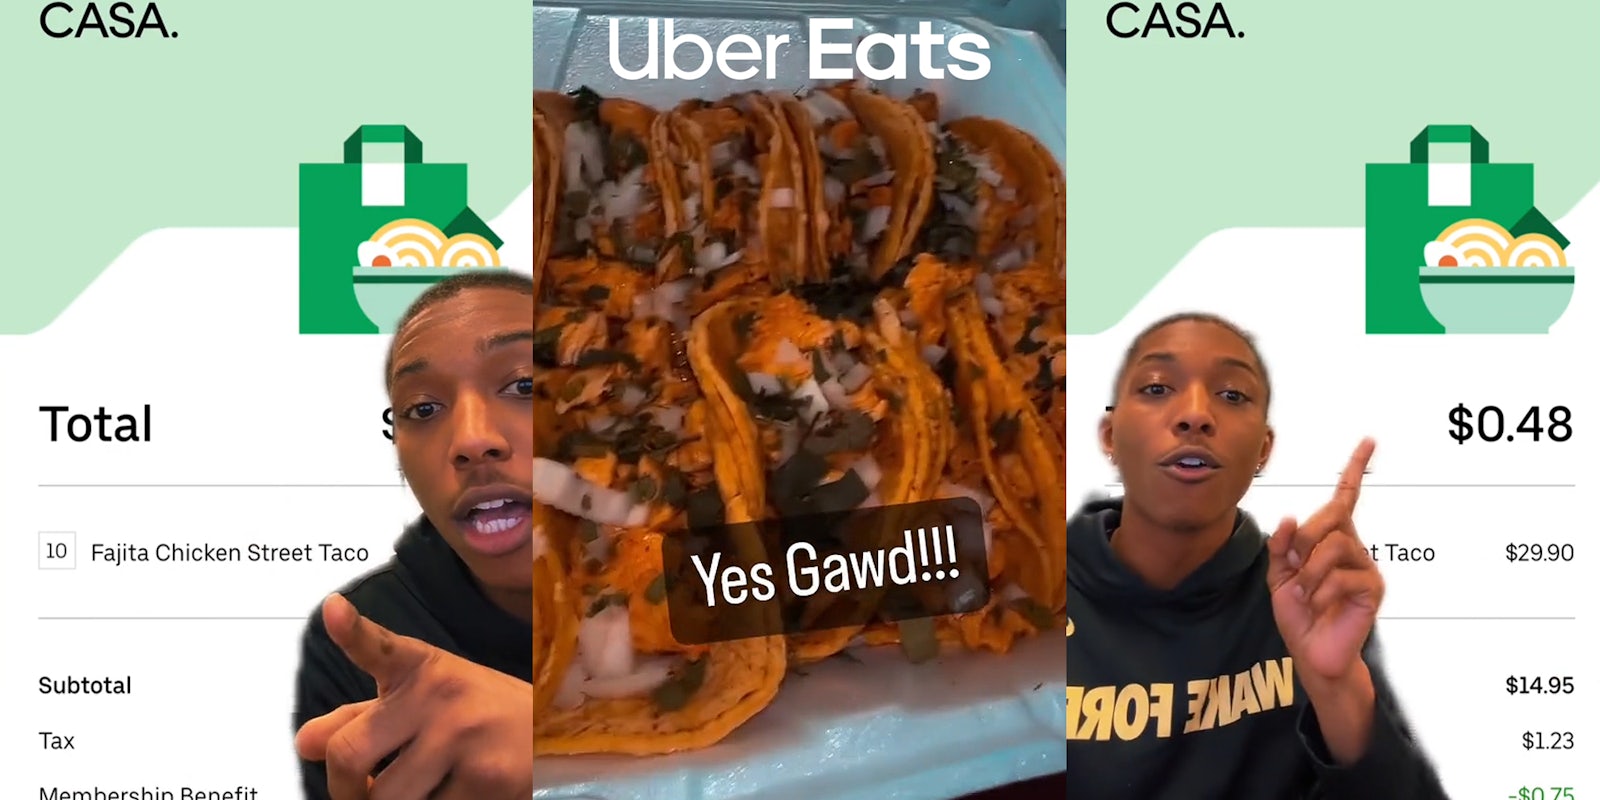 Uber Eats customer greenscreen TikTok over Uber Eats total on screen for ' 10 Fajita Chicken Street Taco' (l) chicken tacos with caption 'Yes Gawd!!!' and Uber Eats logo centered at top (c) Uber Eats customer greenscreen TikTok over Uber Eats total on screen for ' 10 Fajita Chicken Street Taco' at $0.48 from original total of $29.90' (r)